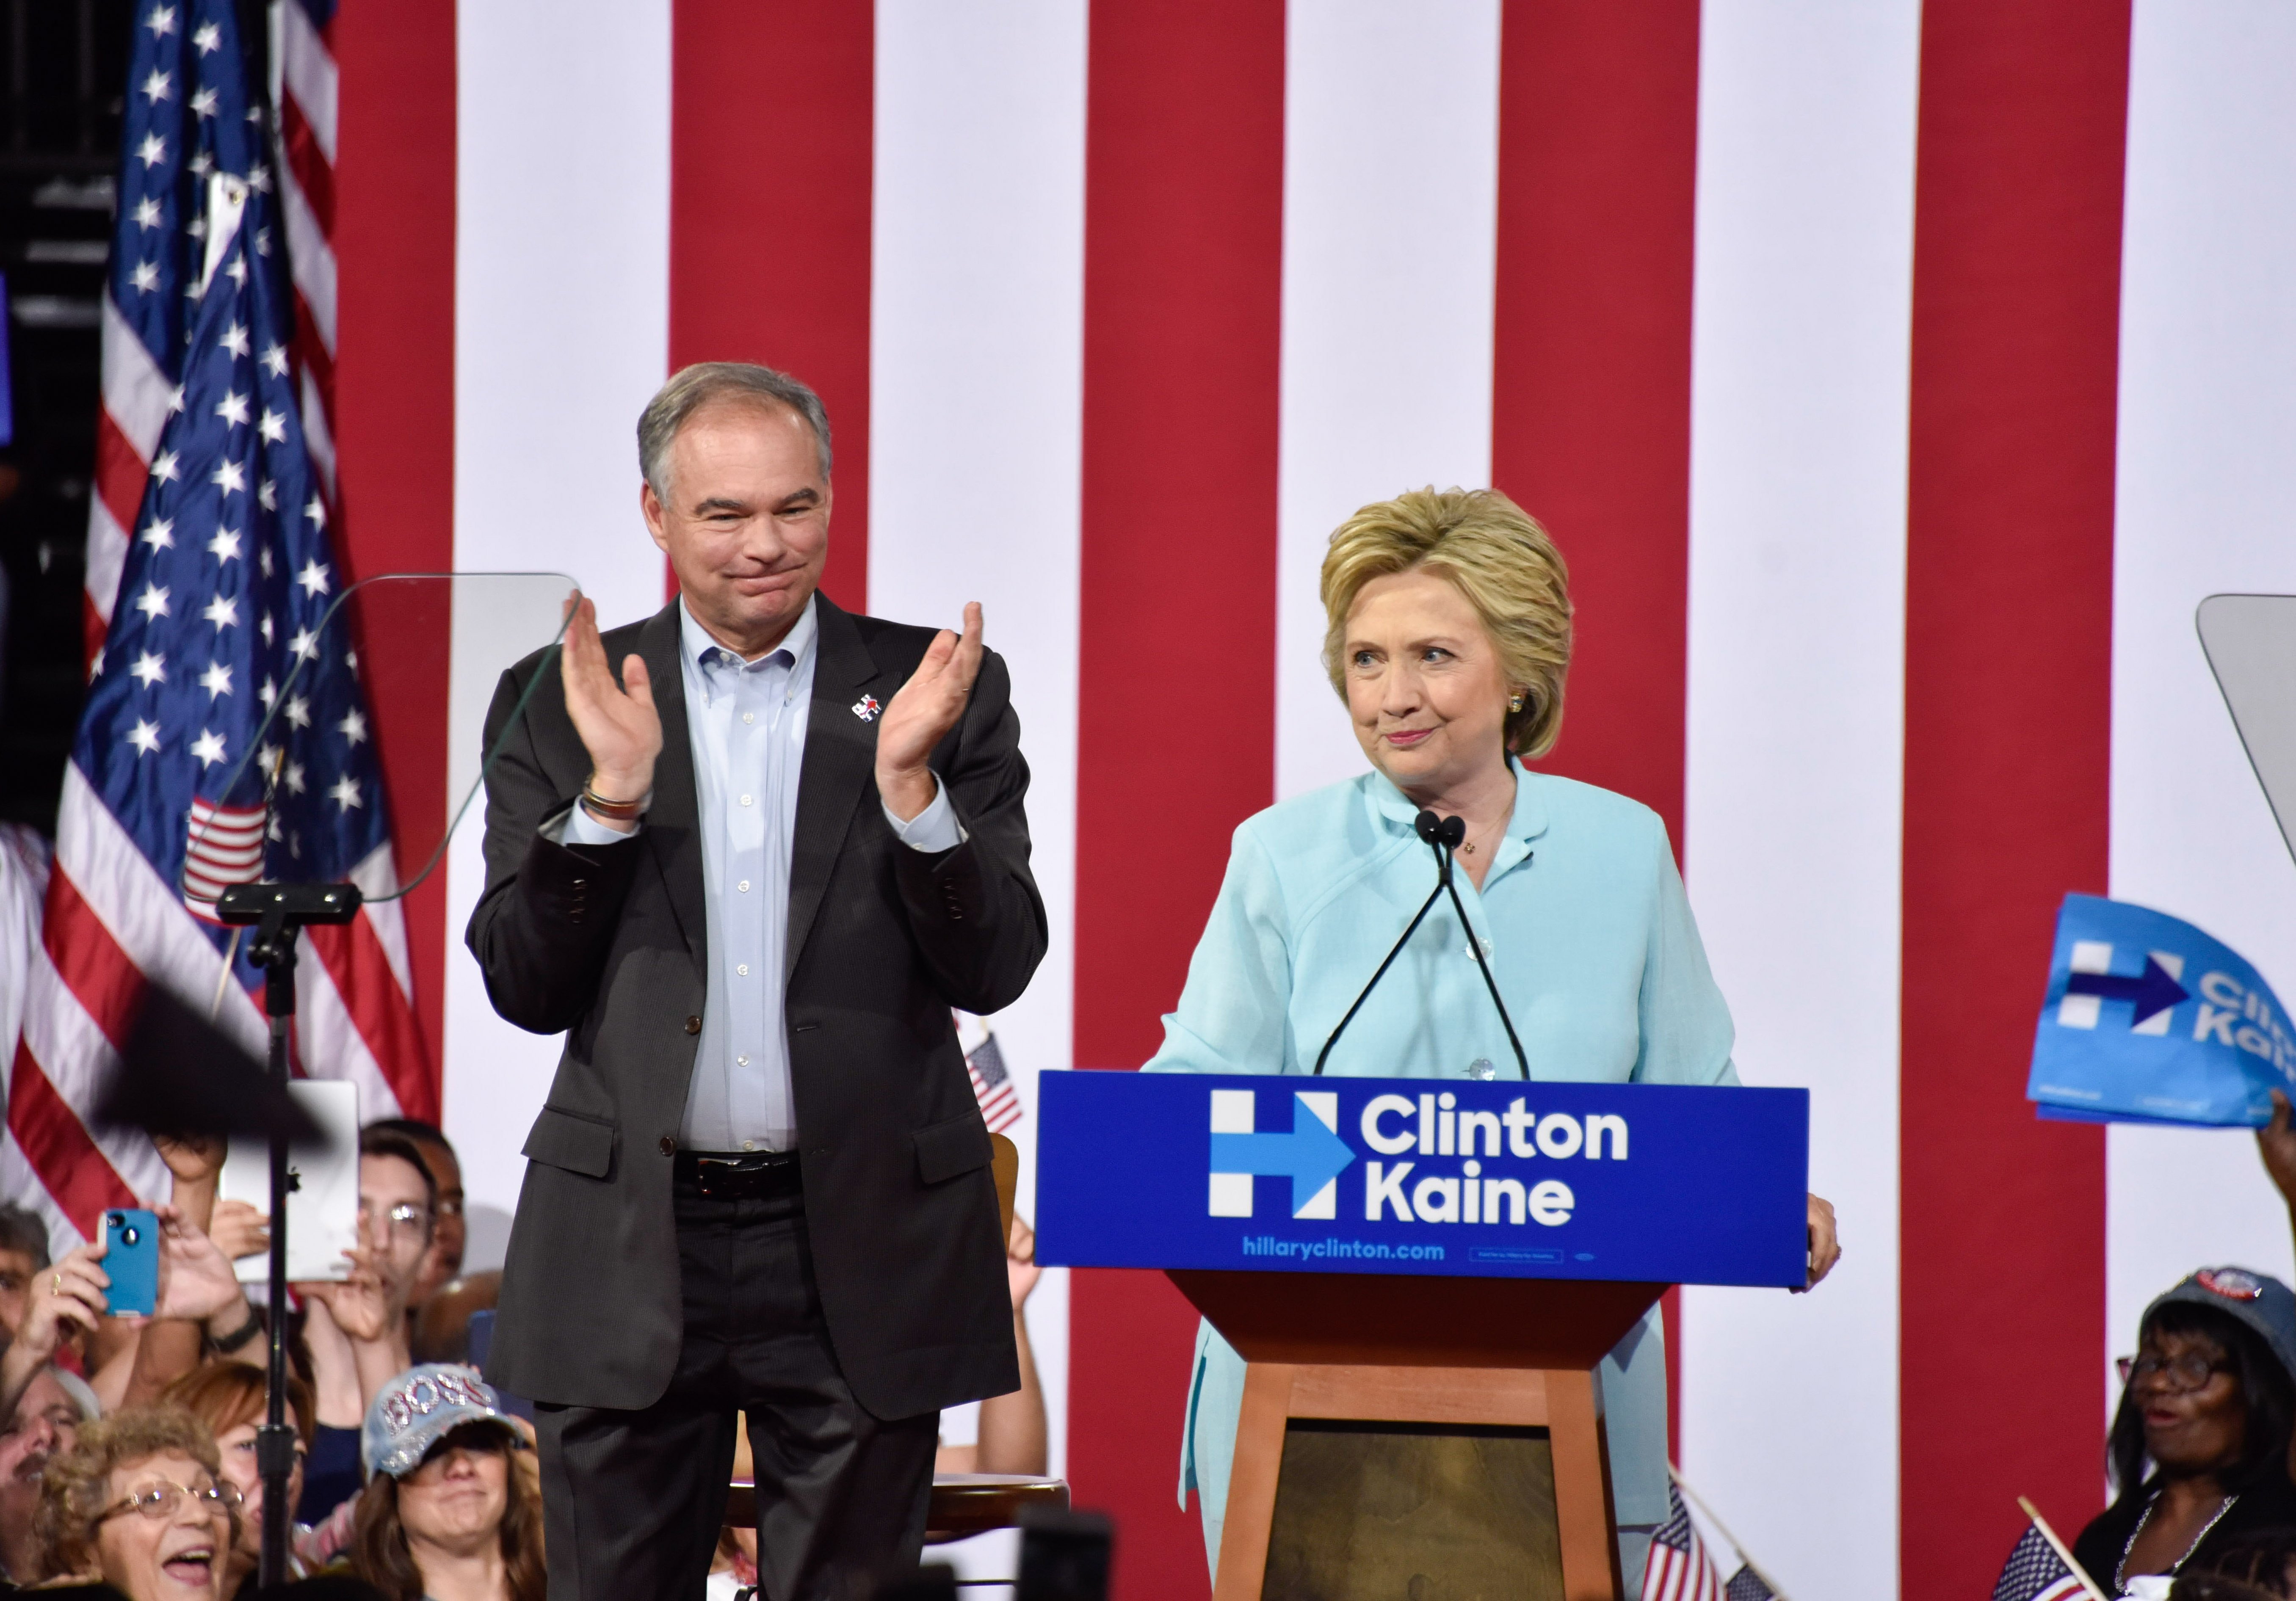 Hillary Clinton and Tim Kaine Rally In Miami